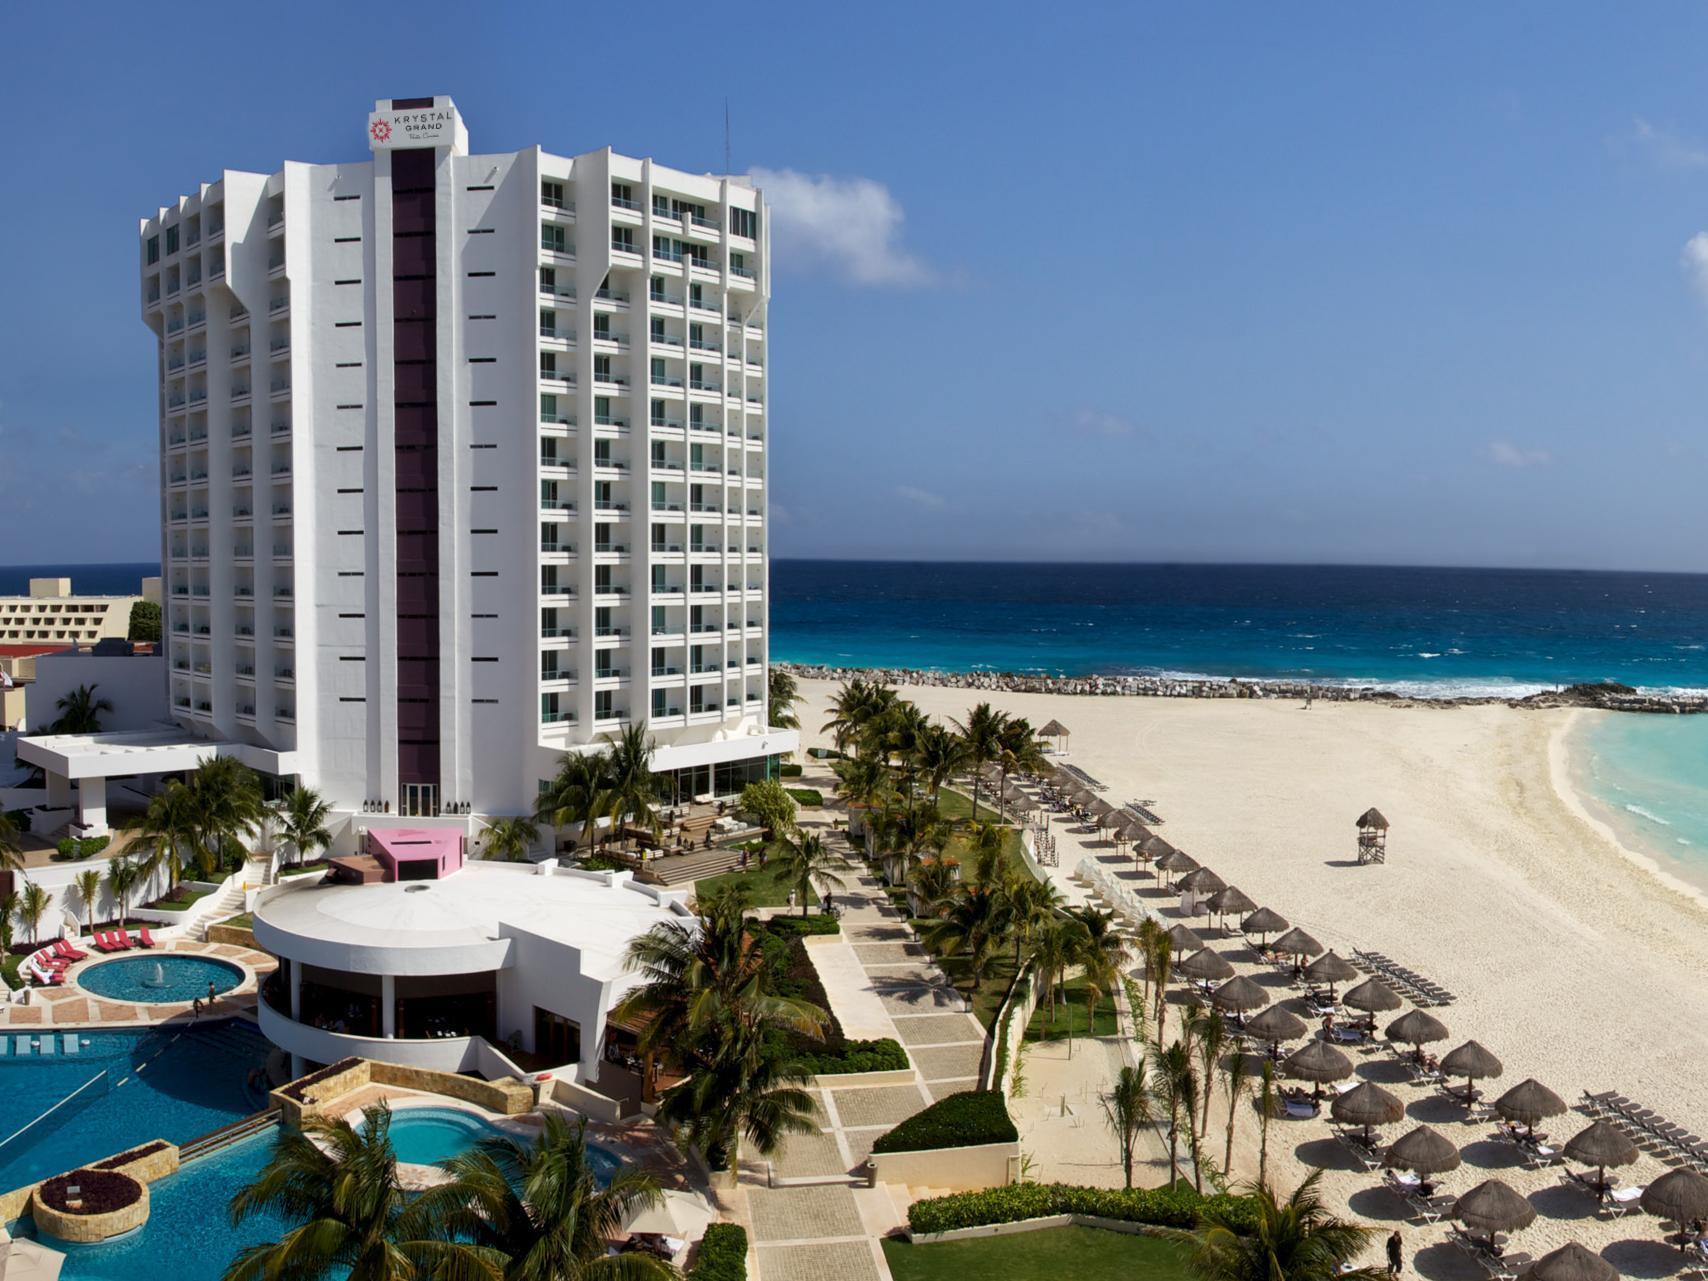 Krystal Grand Punta Cancún Cancun FAQ 2017, What facilities are there in Krystal Grand Punta Cancún Cancun 2017, What Languages Spoken are Supported in Krystal Grand Punta Cancún Cancun 2017, Which payment cards are accepted in Krystal Grand Punta Cancún Cancun , Cancun Krystal Grand Punta Cancún room facilities and services Q&A 2017, Cancun Krystal Grand Punta Cancún online booking services 2017, Cancun Krystal Grand Punta Cancún address 2017, Cancun Krystal Grand Punta Cancún telephone number 2017,Cancun Krystal Grand Punta Cancún map 2017, Cancun Krystal Grand Punta Cancún traffic guide 2017, how to go Cancun Krystal Grand Punta Cancún, Cancun Krystal Grand Punta Cancún booking online 2017, Cancun Krystal Grand Punta Cancún room types 2017.